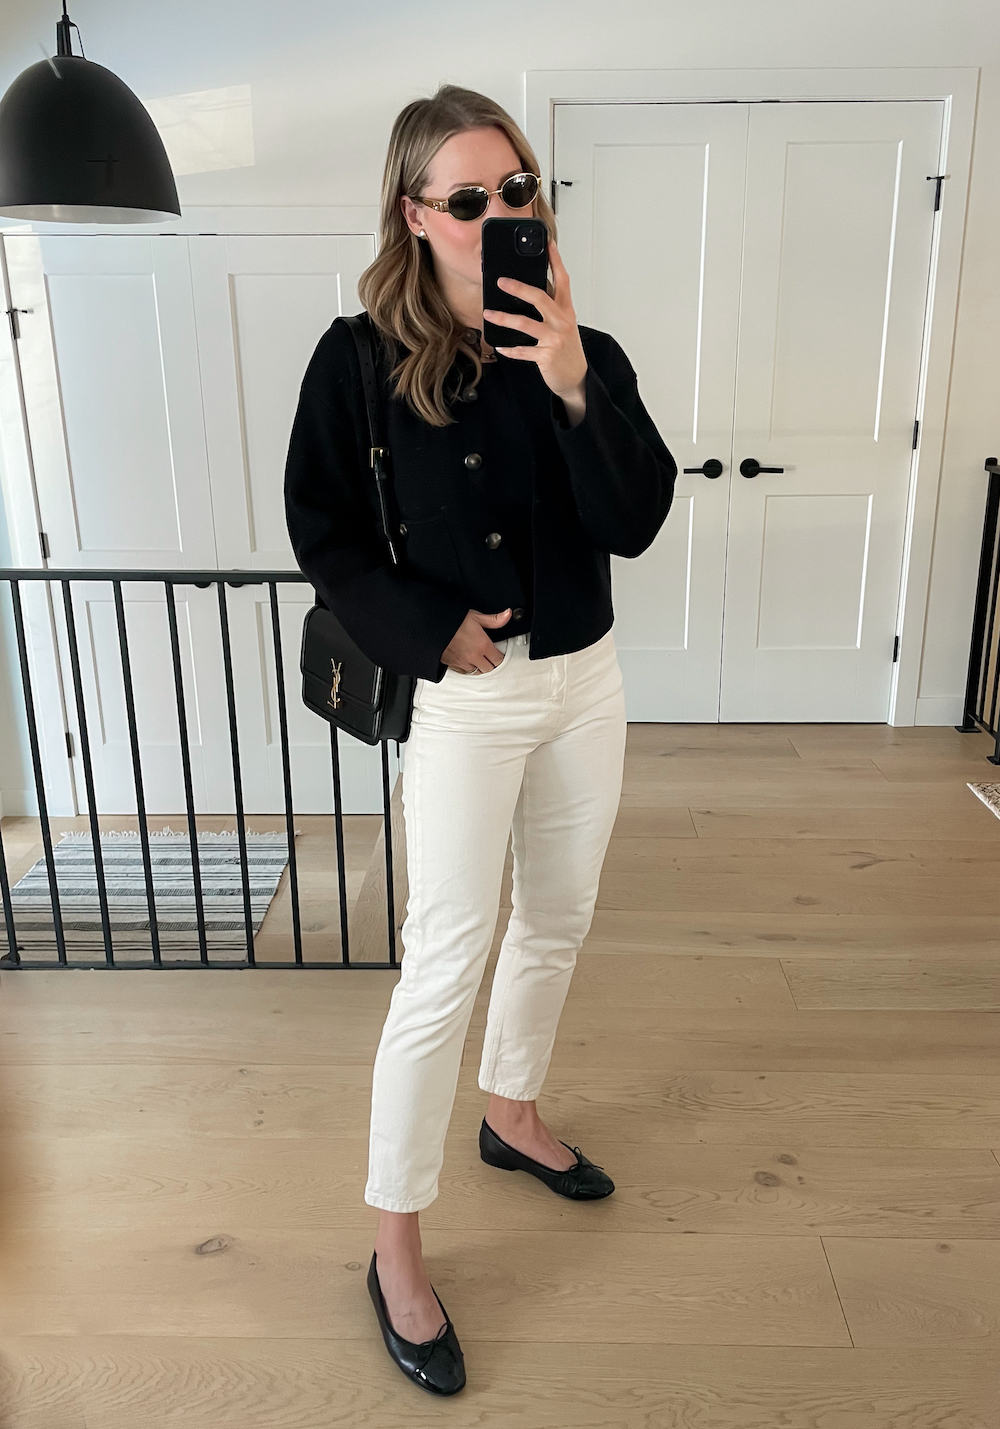 Christal wearing white jeans, black ballet flats, and a black cropped jacket with black accessories.